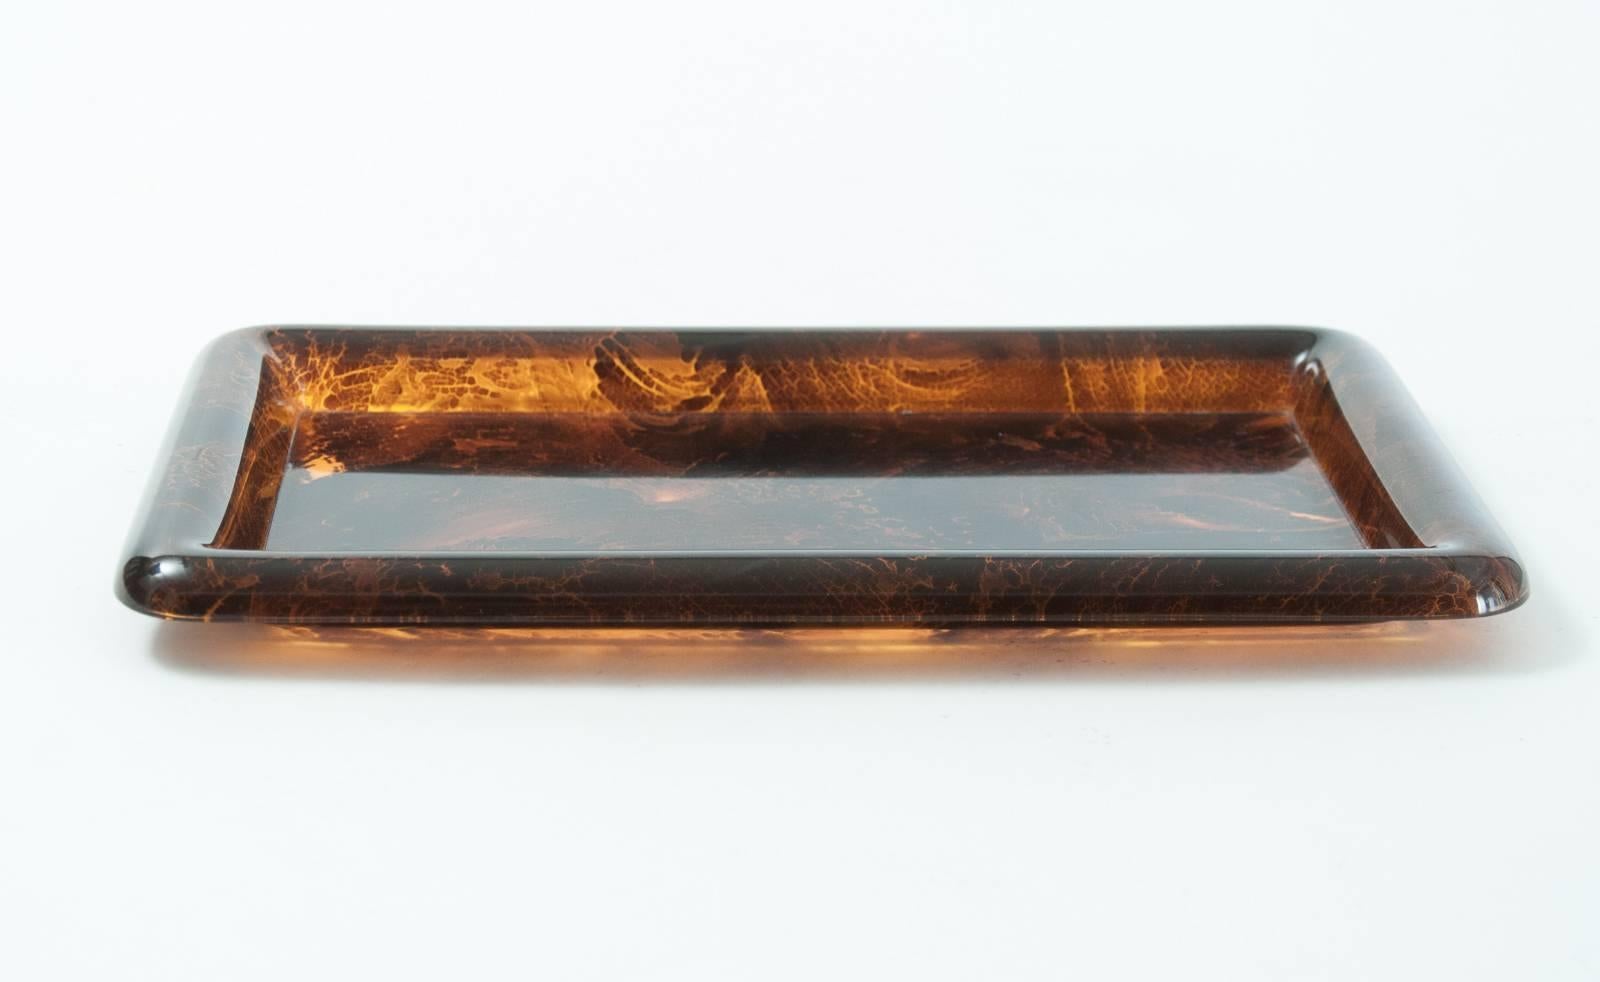 Italian Midcentury Faux Tortoiseshell Tray by Christian Dior with Original Label